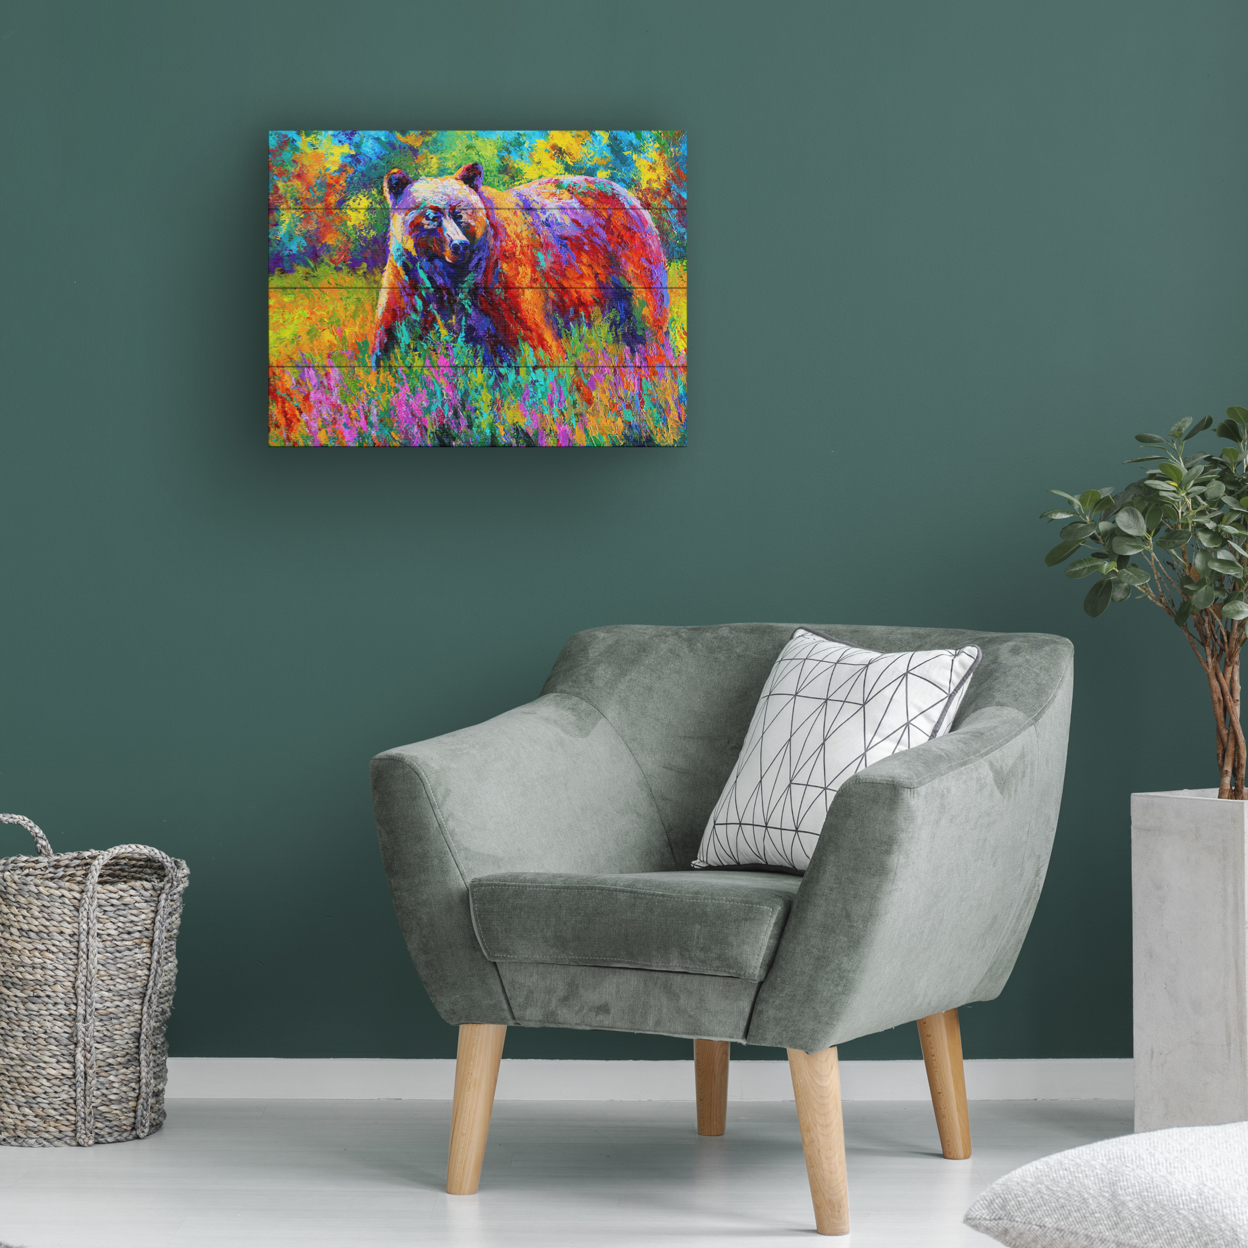 Wall Art 12 X 16 Inches Titled Grizz On Guard Ready To Hang Printed On Wooden Planks